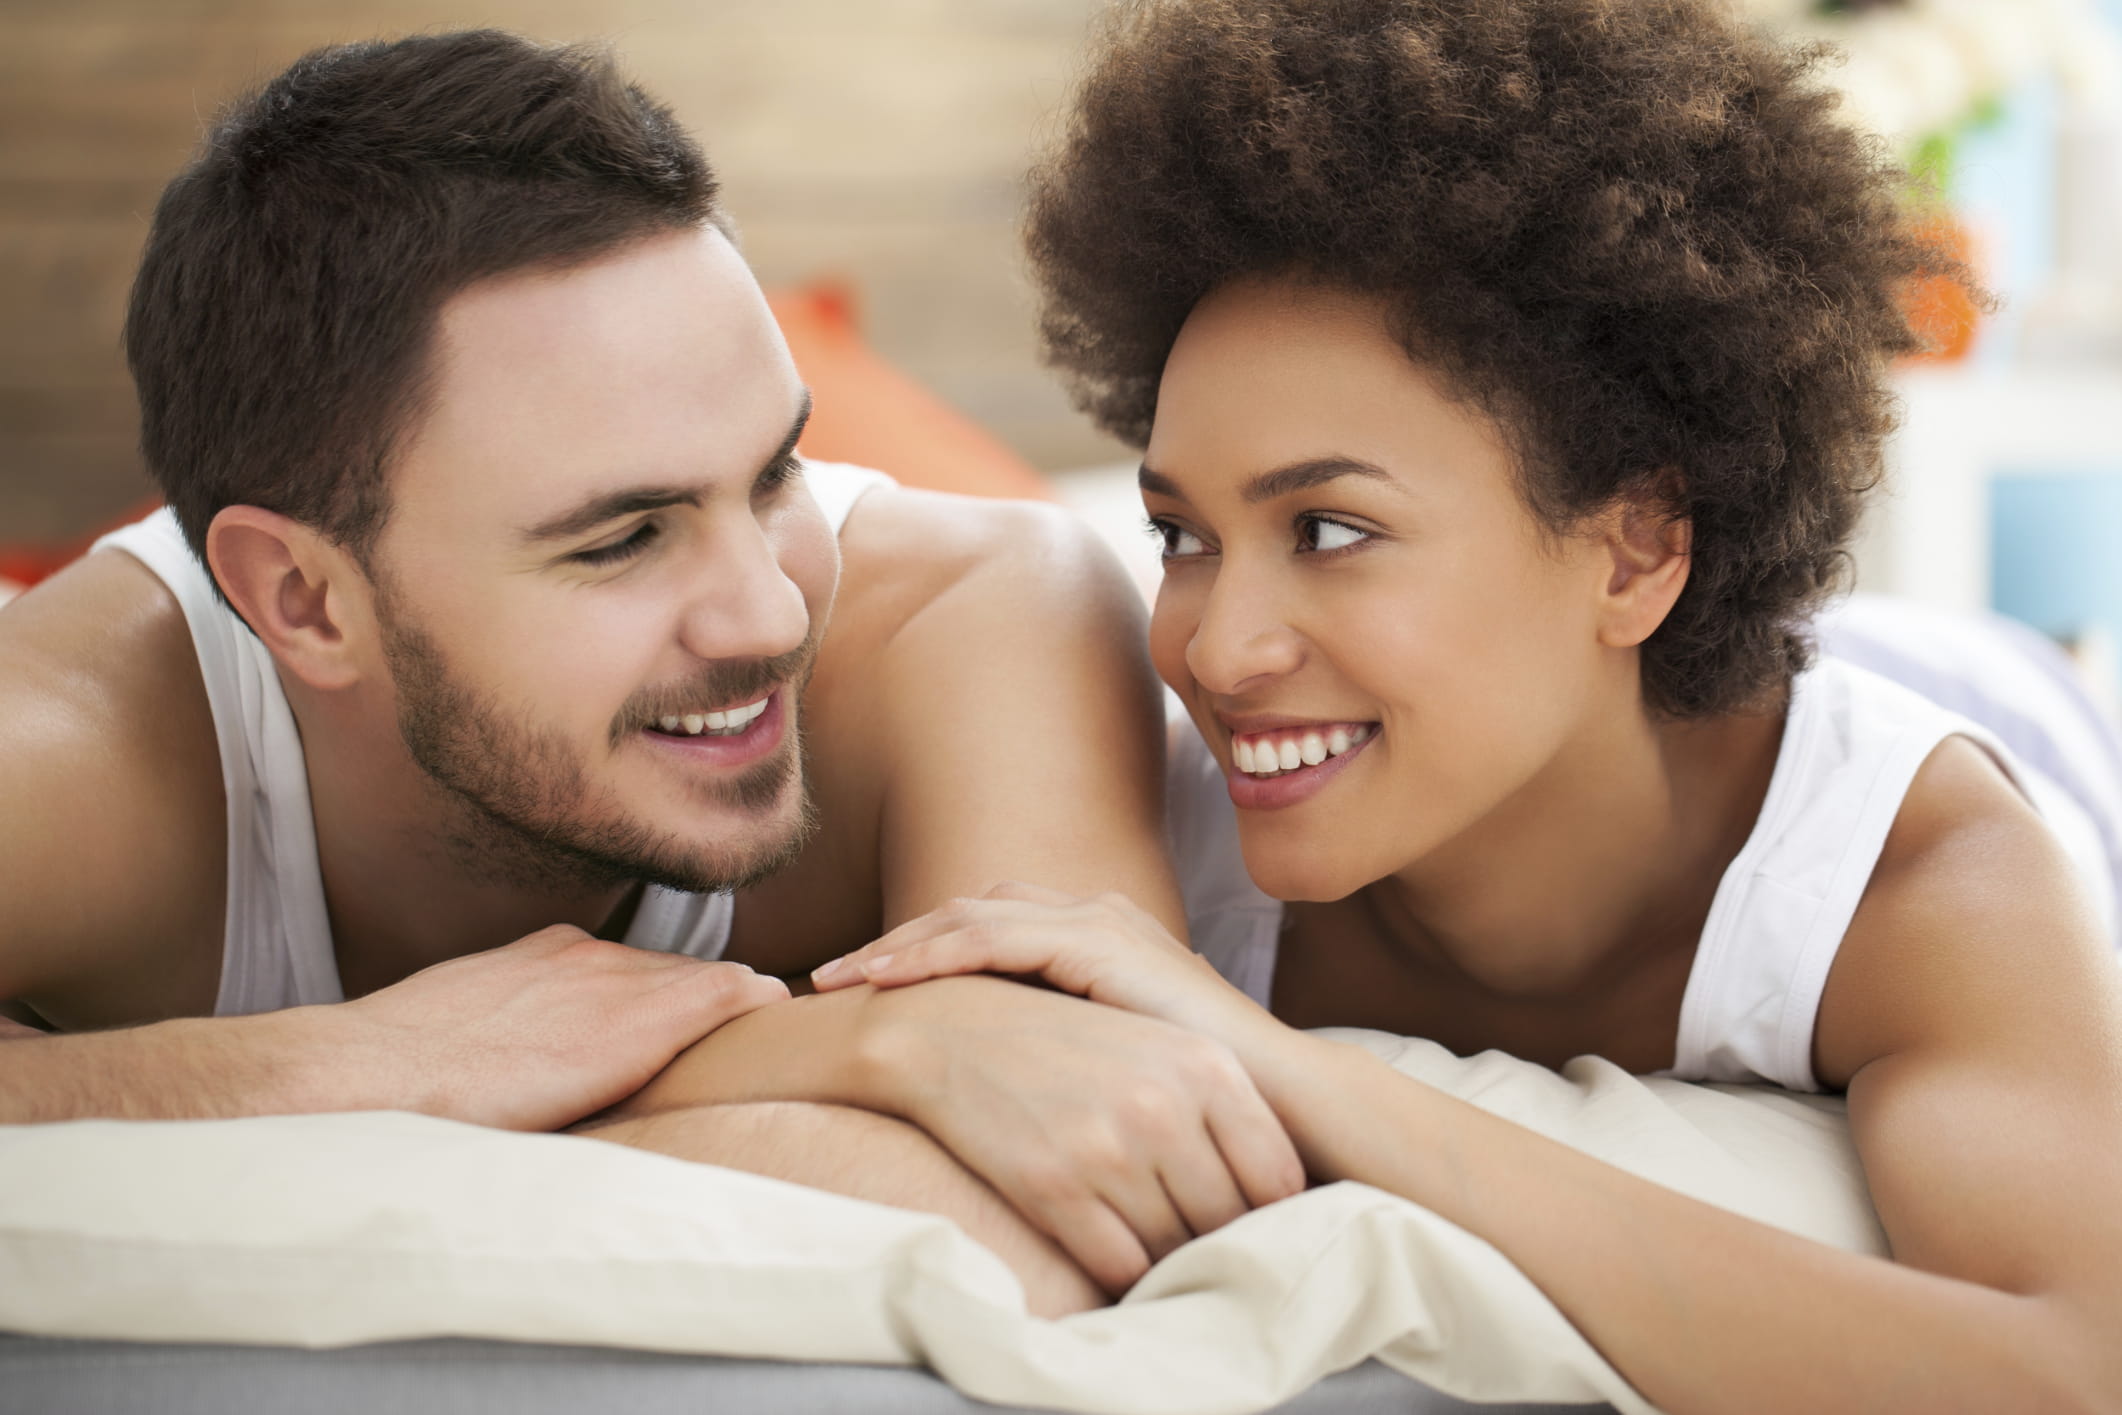 Finding Authenticity and Intimacy in Your Relationship